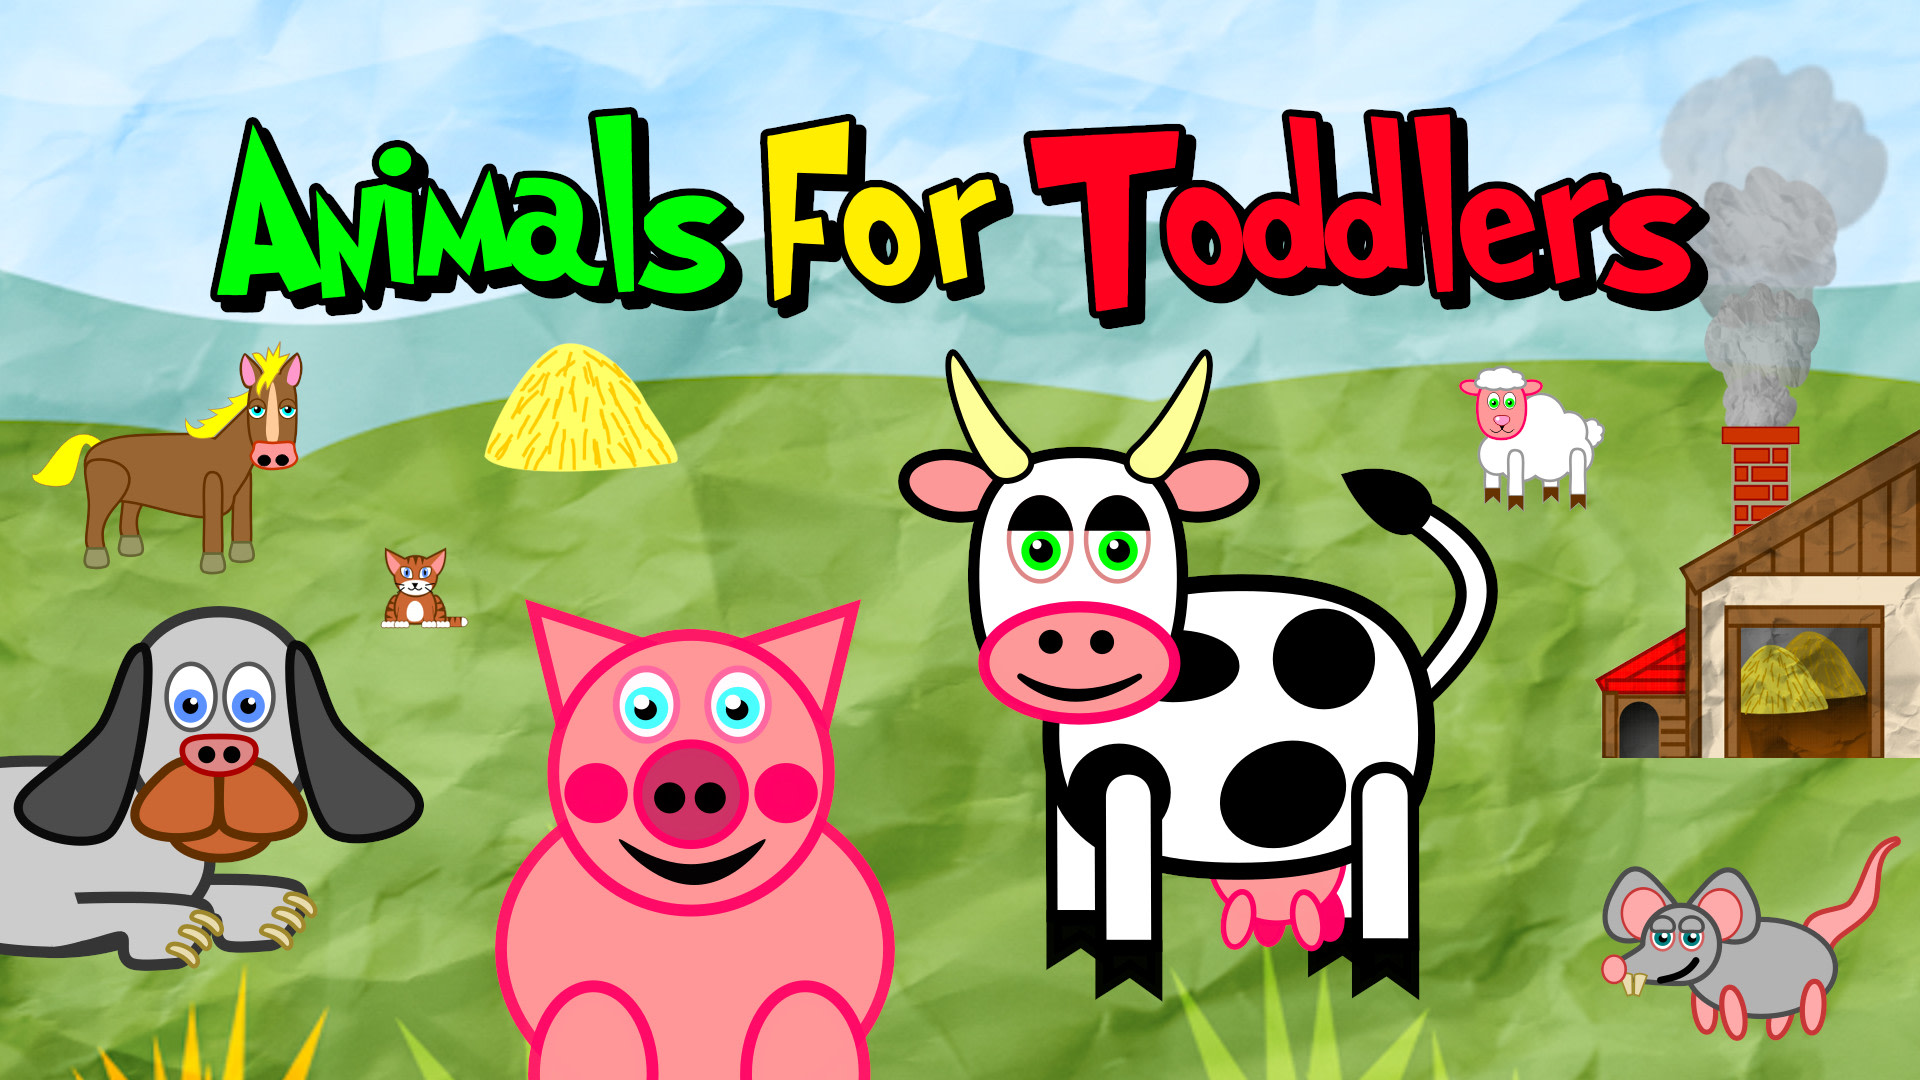 Animals for Toddlers